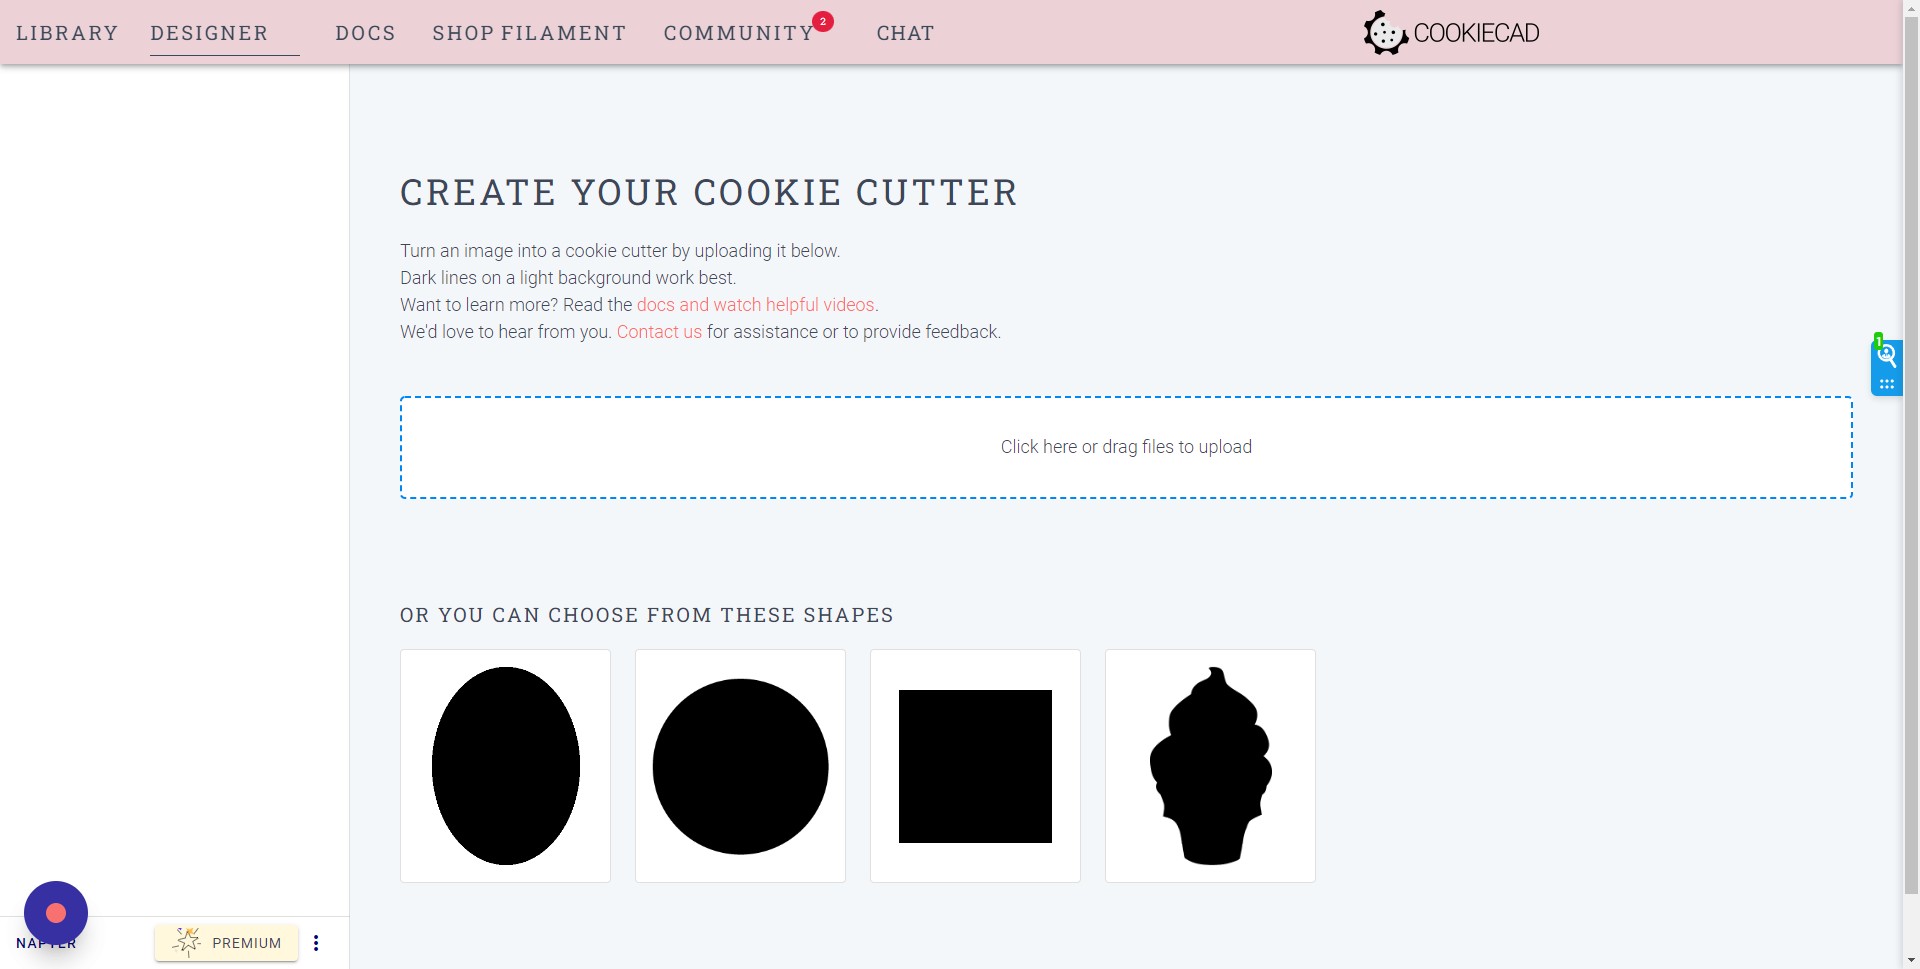 Upload an image or select one of the existing shapes We&#39;ll use the ice cream